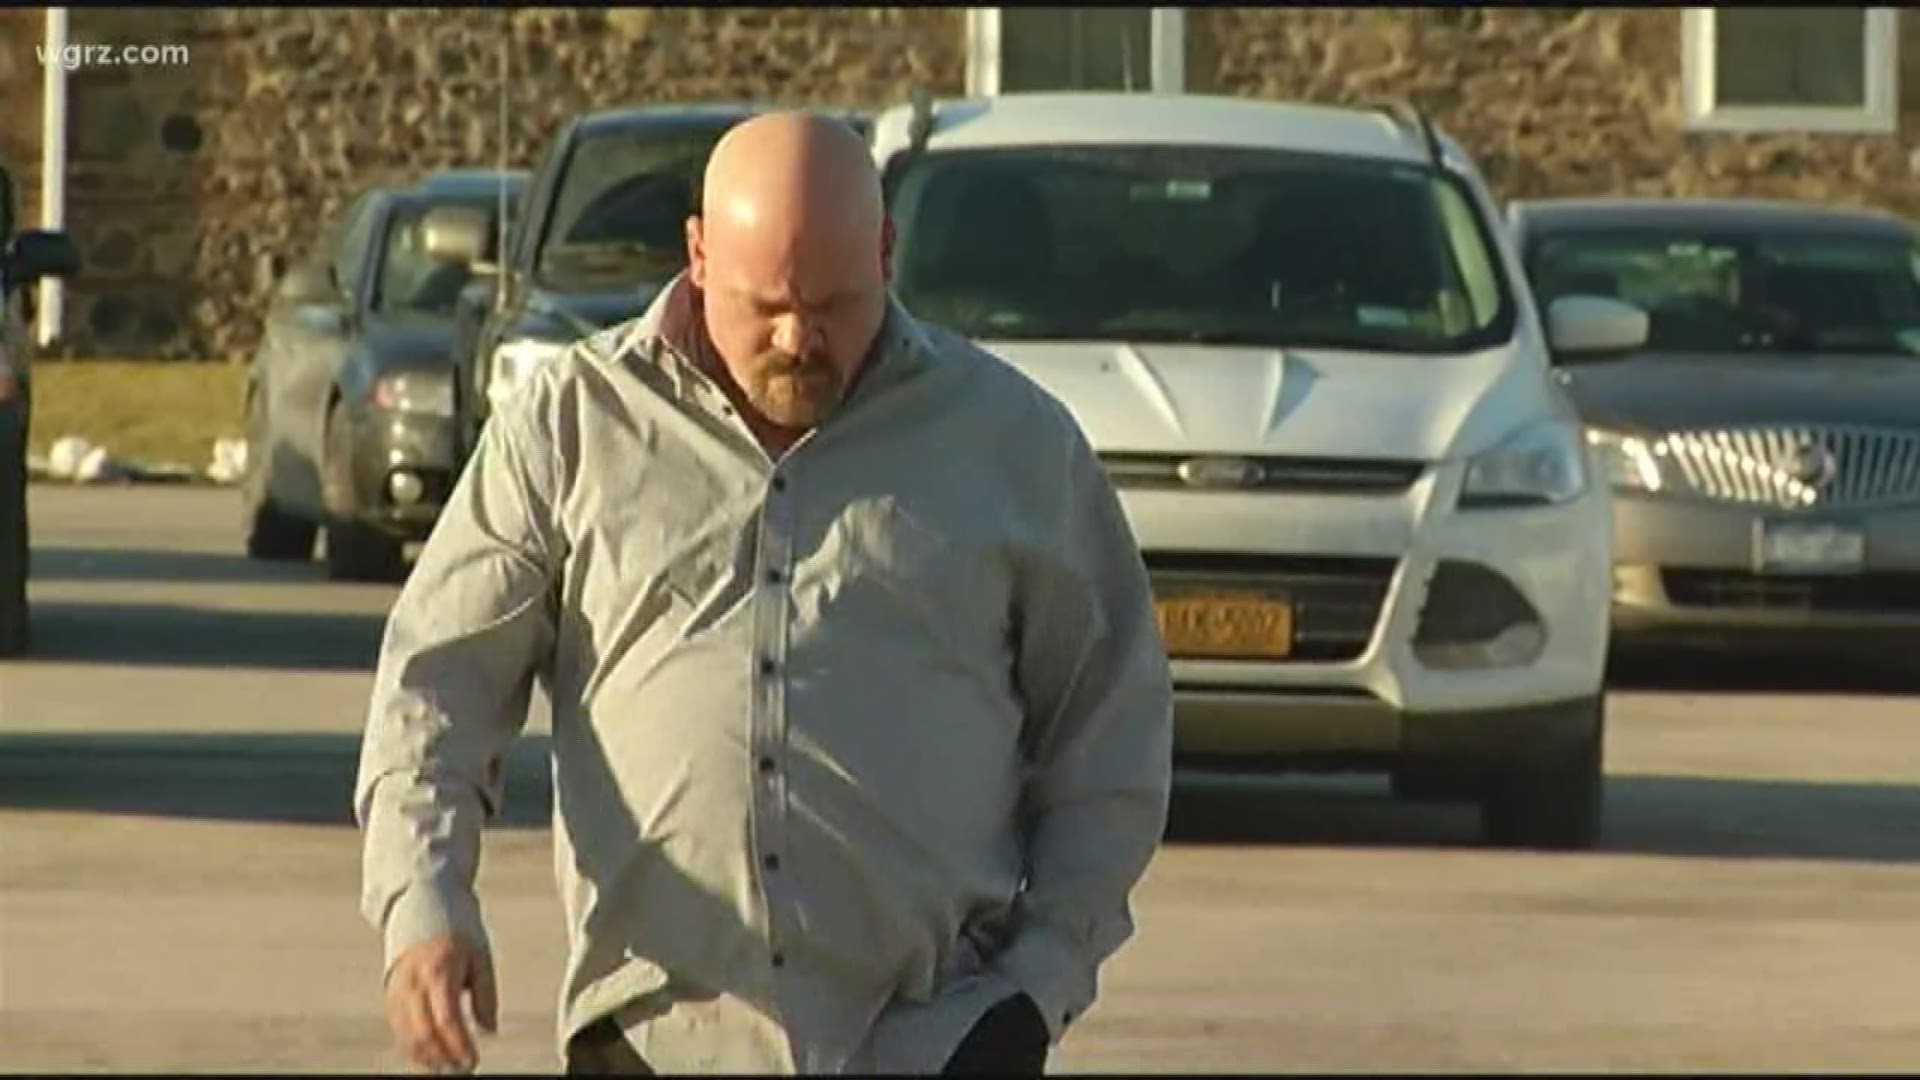 Man Admits To Charge In CO Poisoning Deaths